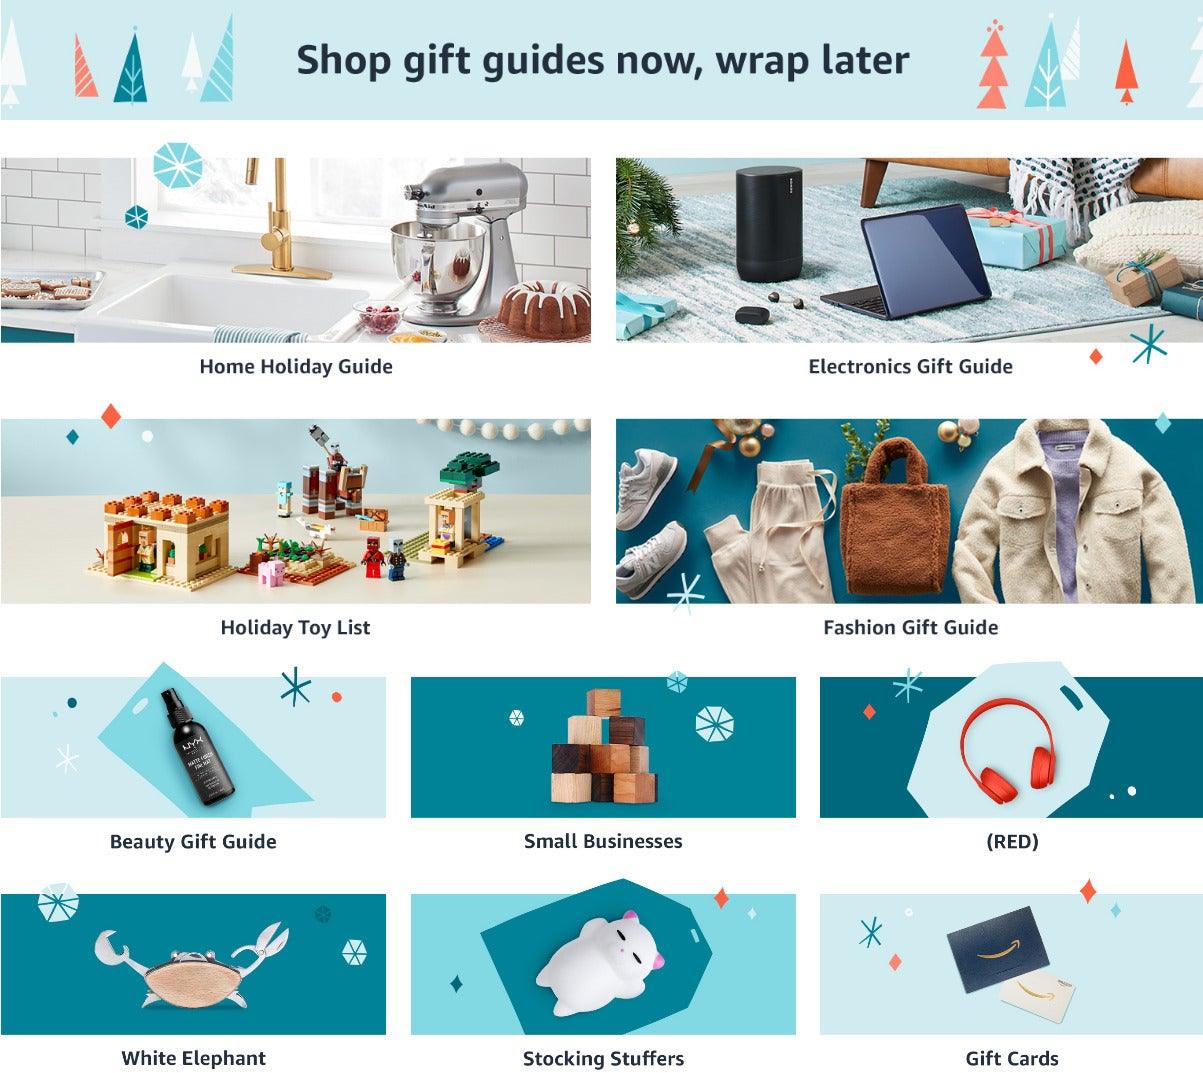 Shop Gifts for Everyone - The Amazon 2020 Holiday Guide Part 1 - 4aKid